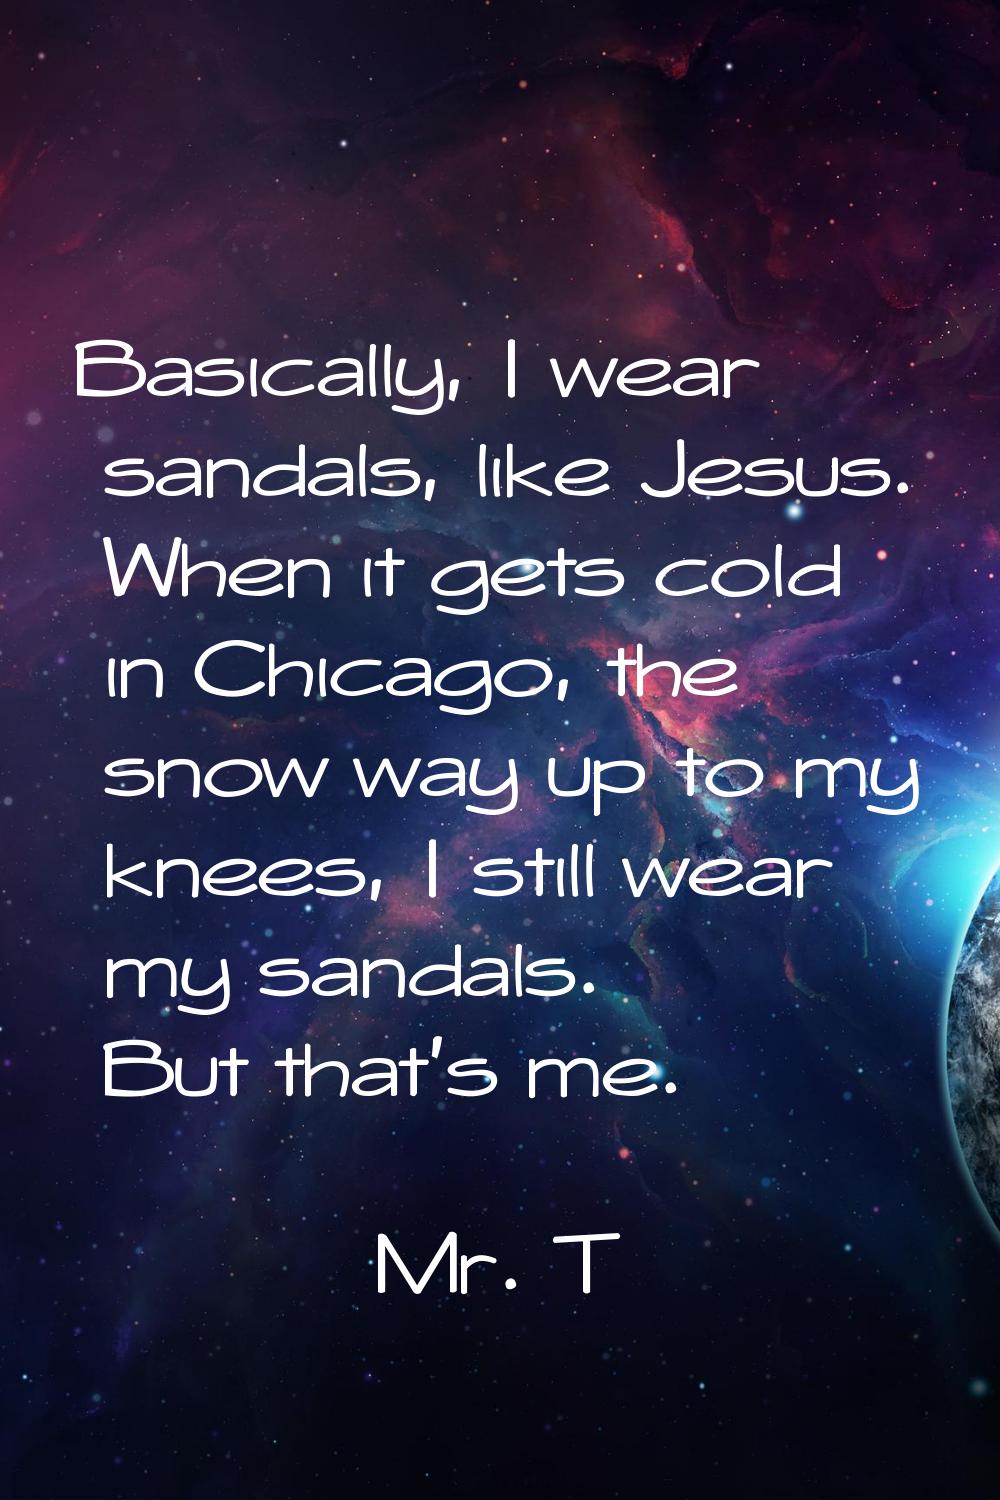 Basically, I wear sandals, like Jesus. When it gets cold in Chicago, the snow way up to my knees, I